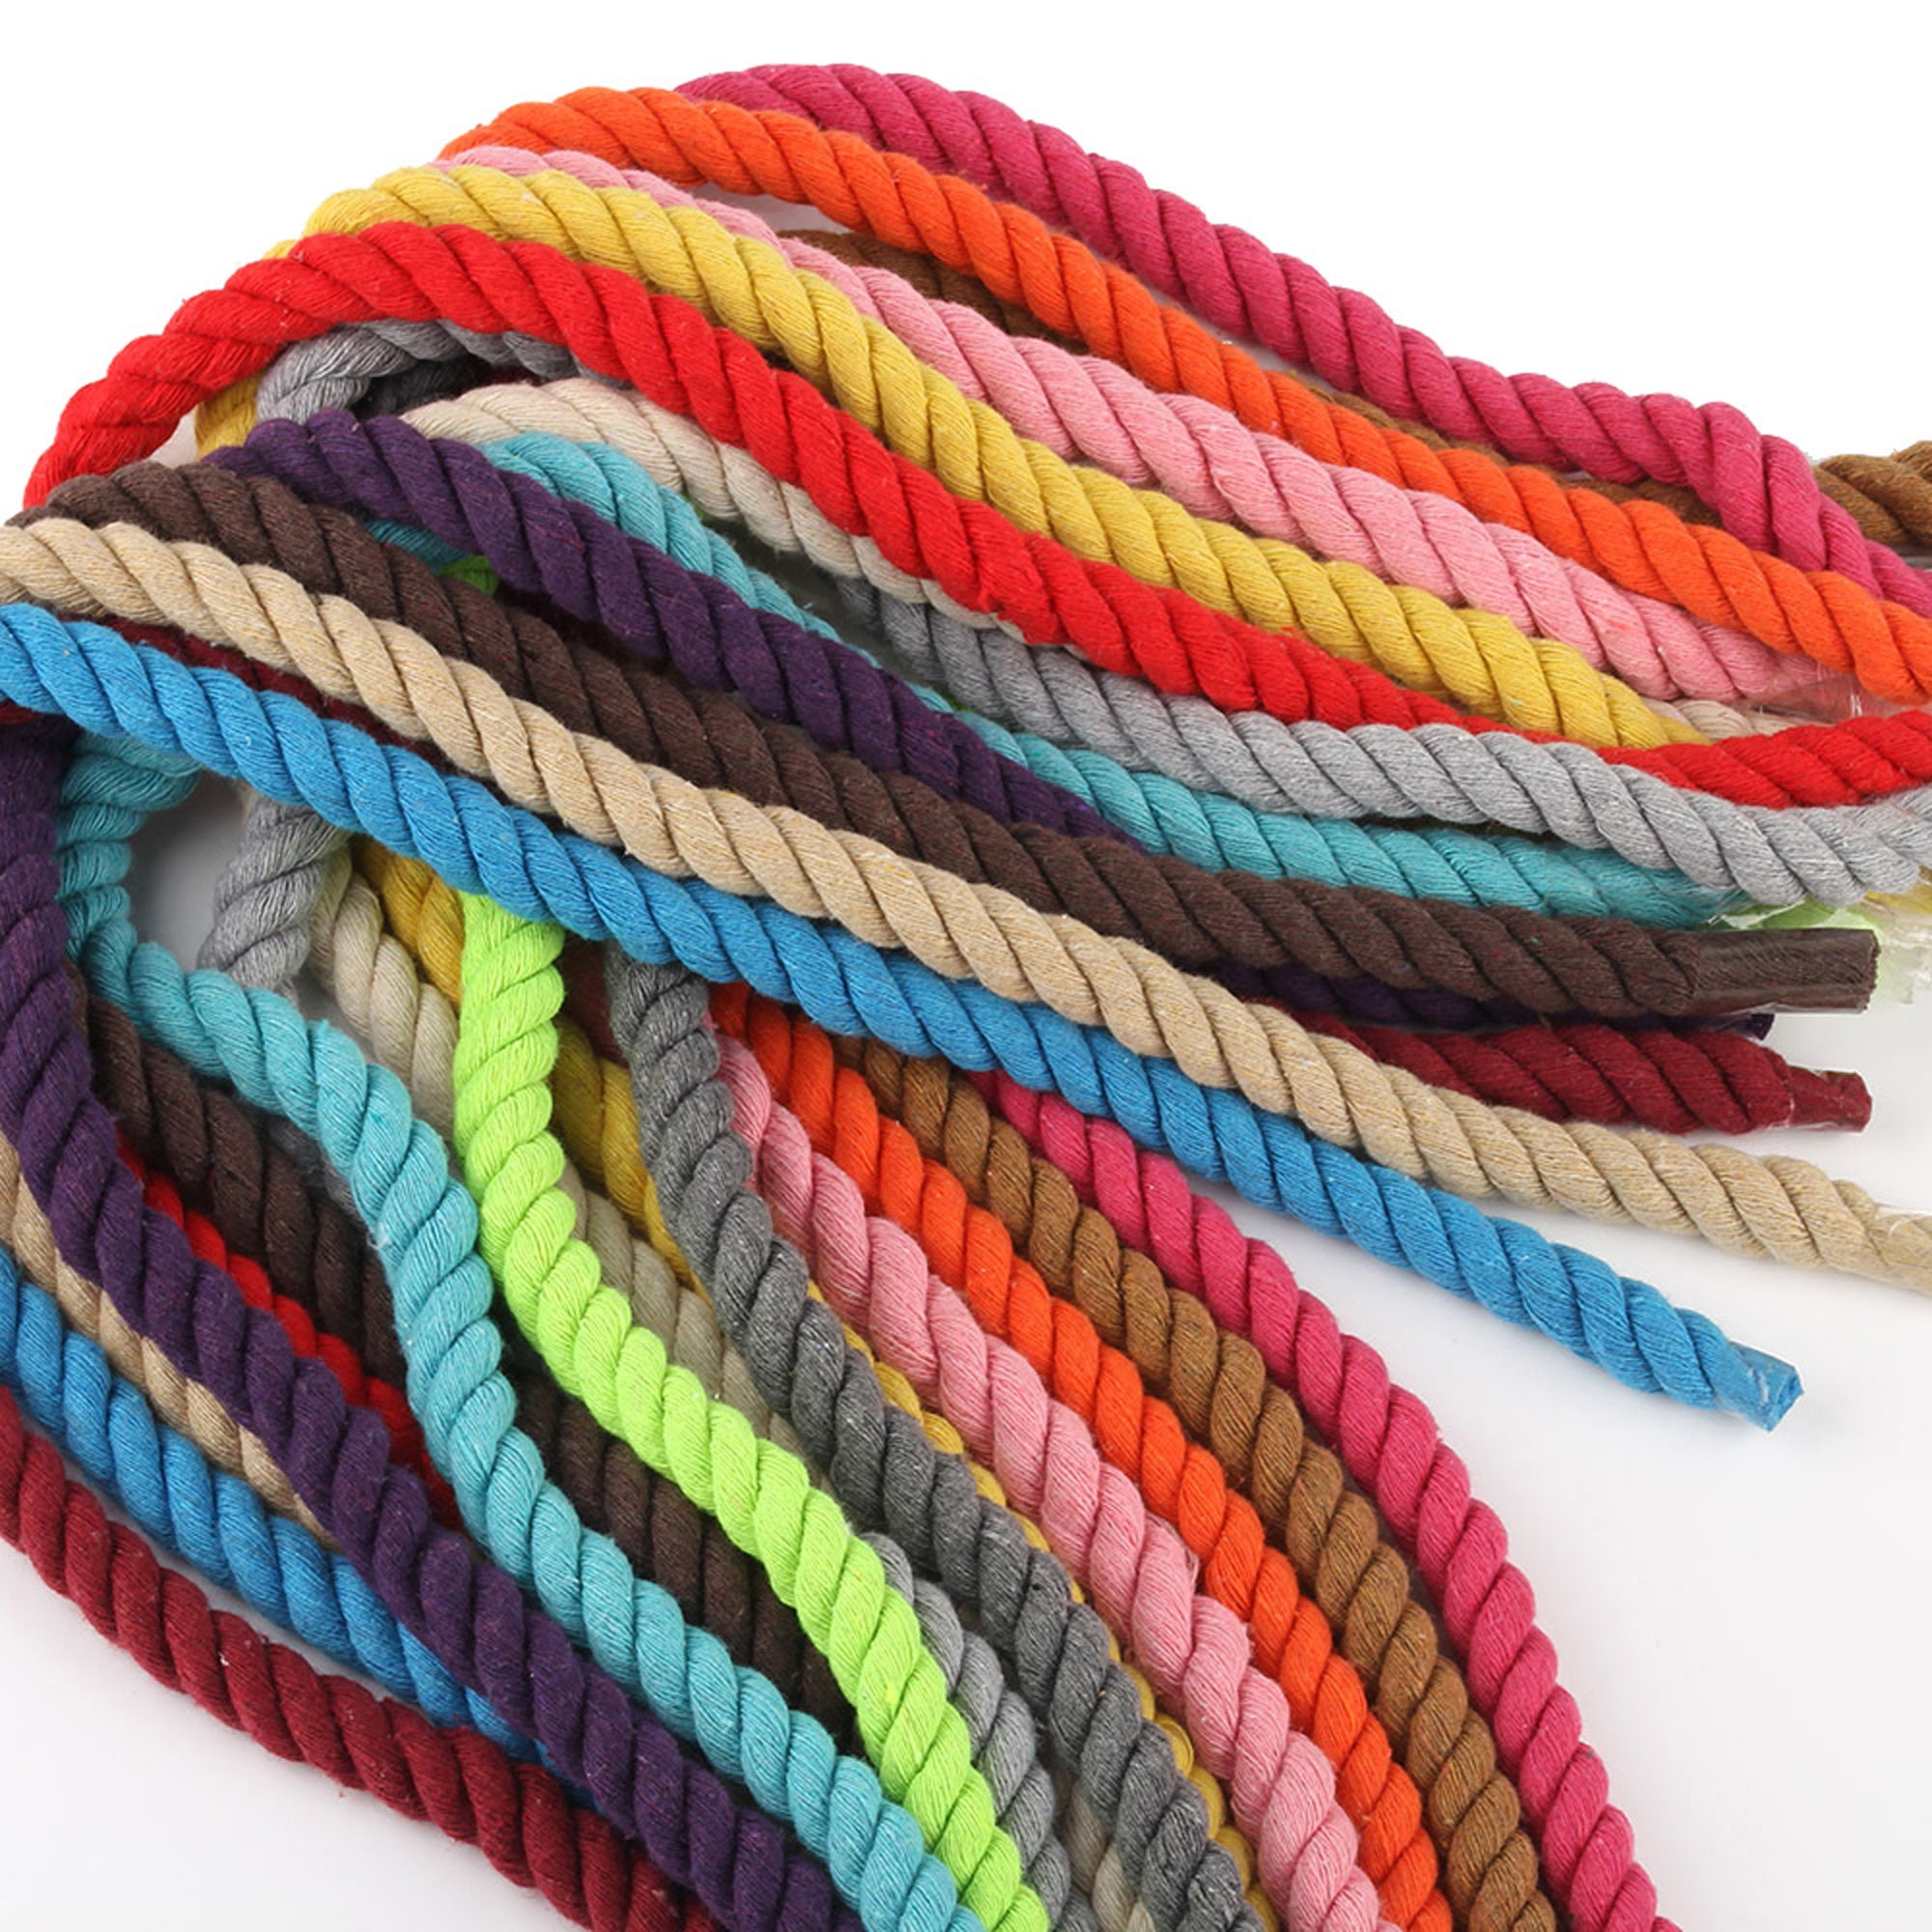 Three Strand Twisted Multicolored Cotton Rope Cord Soft Rope 4mm/50meters 